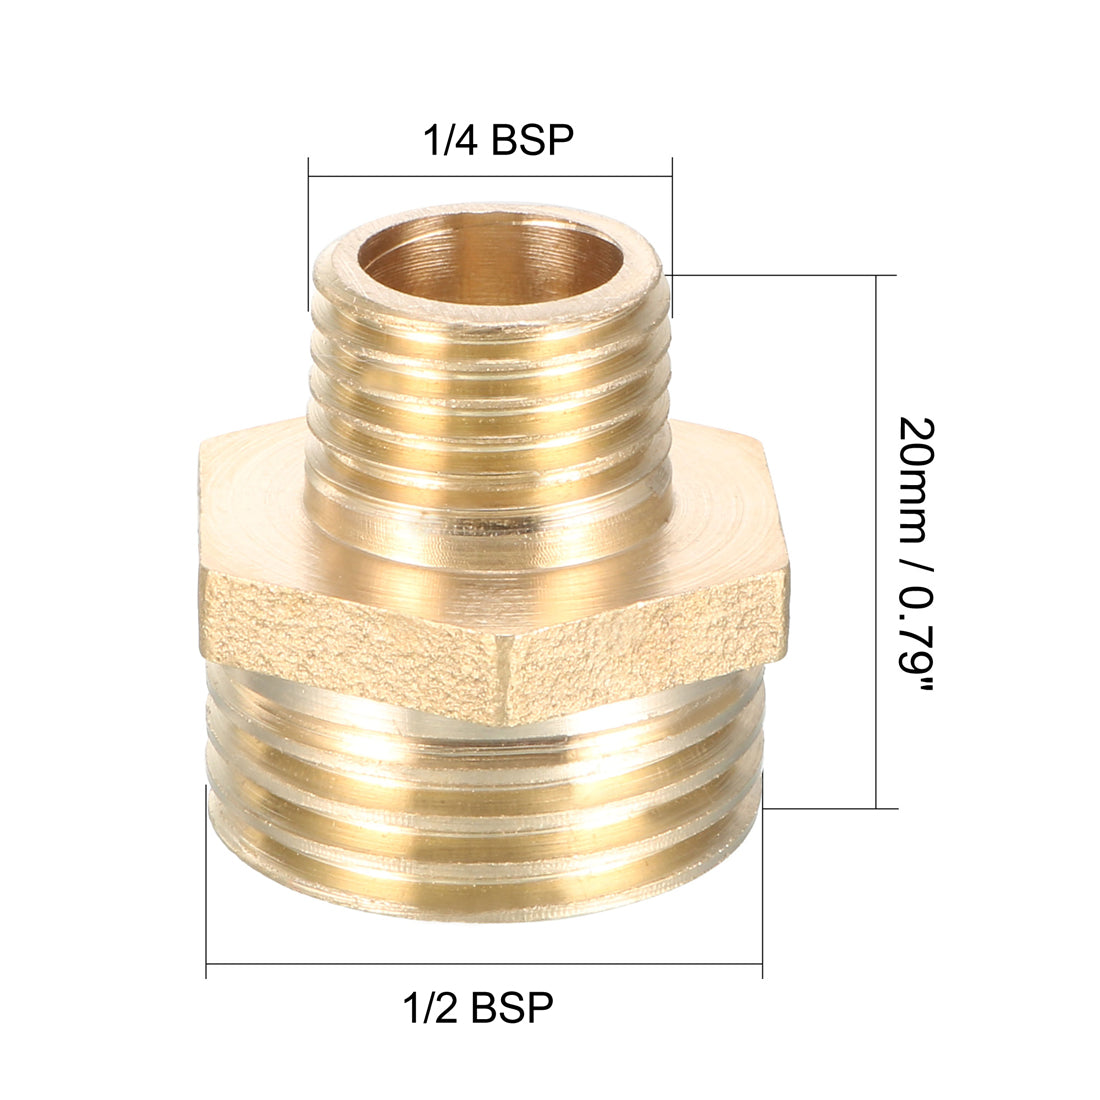 uxcell Uxcell Brass Pipe Fitting Reducing Hex Bushing 1/2 BSP Male x 1/4 BSP Male Adapter 2pcs